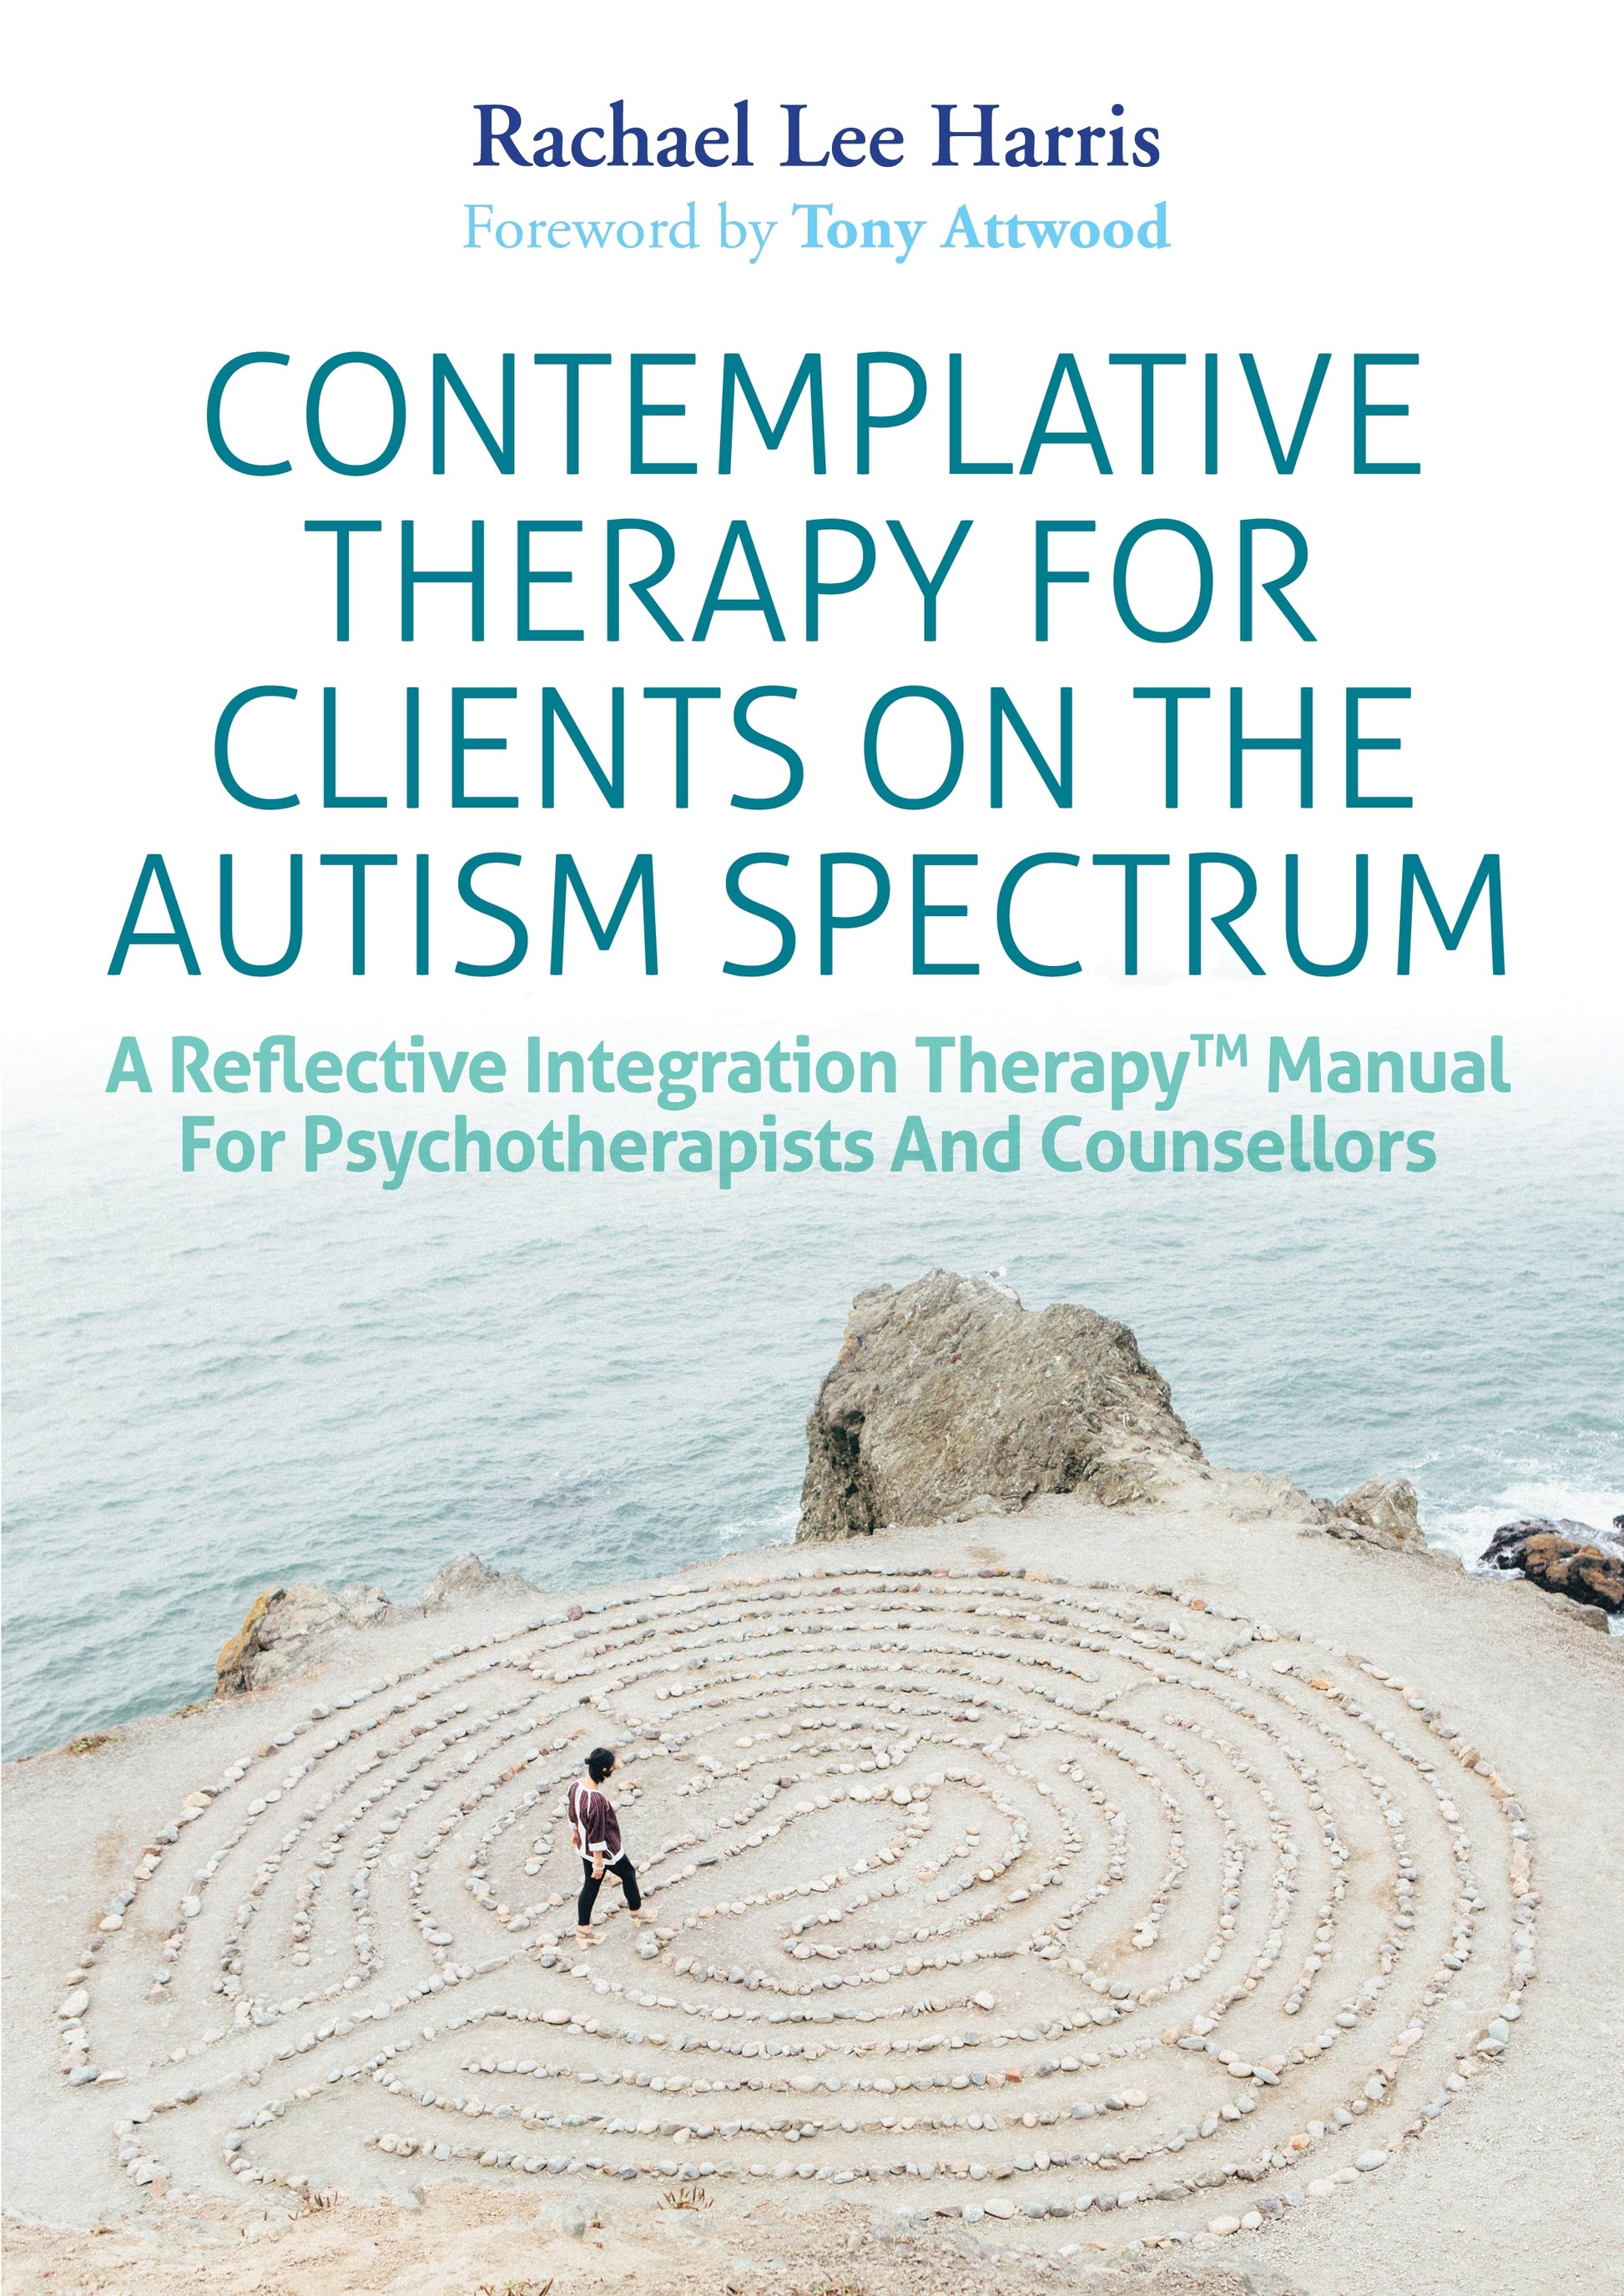 Contemplative Therapy for Clients on the Autism Spectrum by Rachael Lee Harris, Dr Anthony Attwood